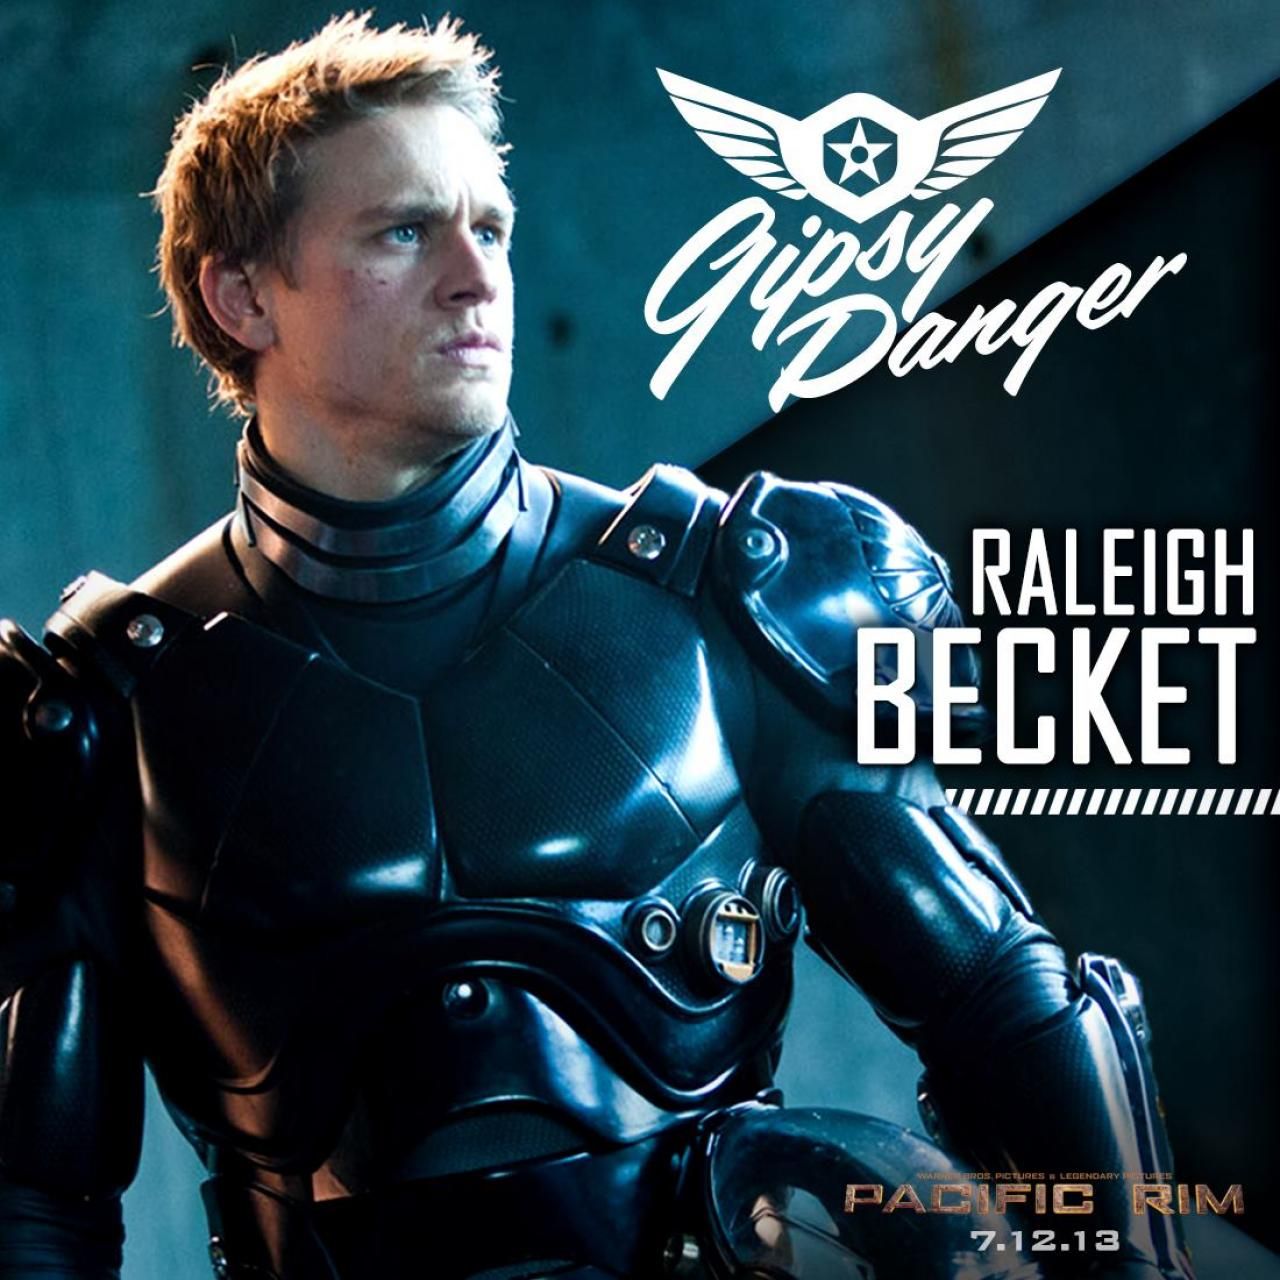 Pacific Rim photo with Charlie Hunnam as Jaeger pilot Raleigh Becket